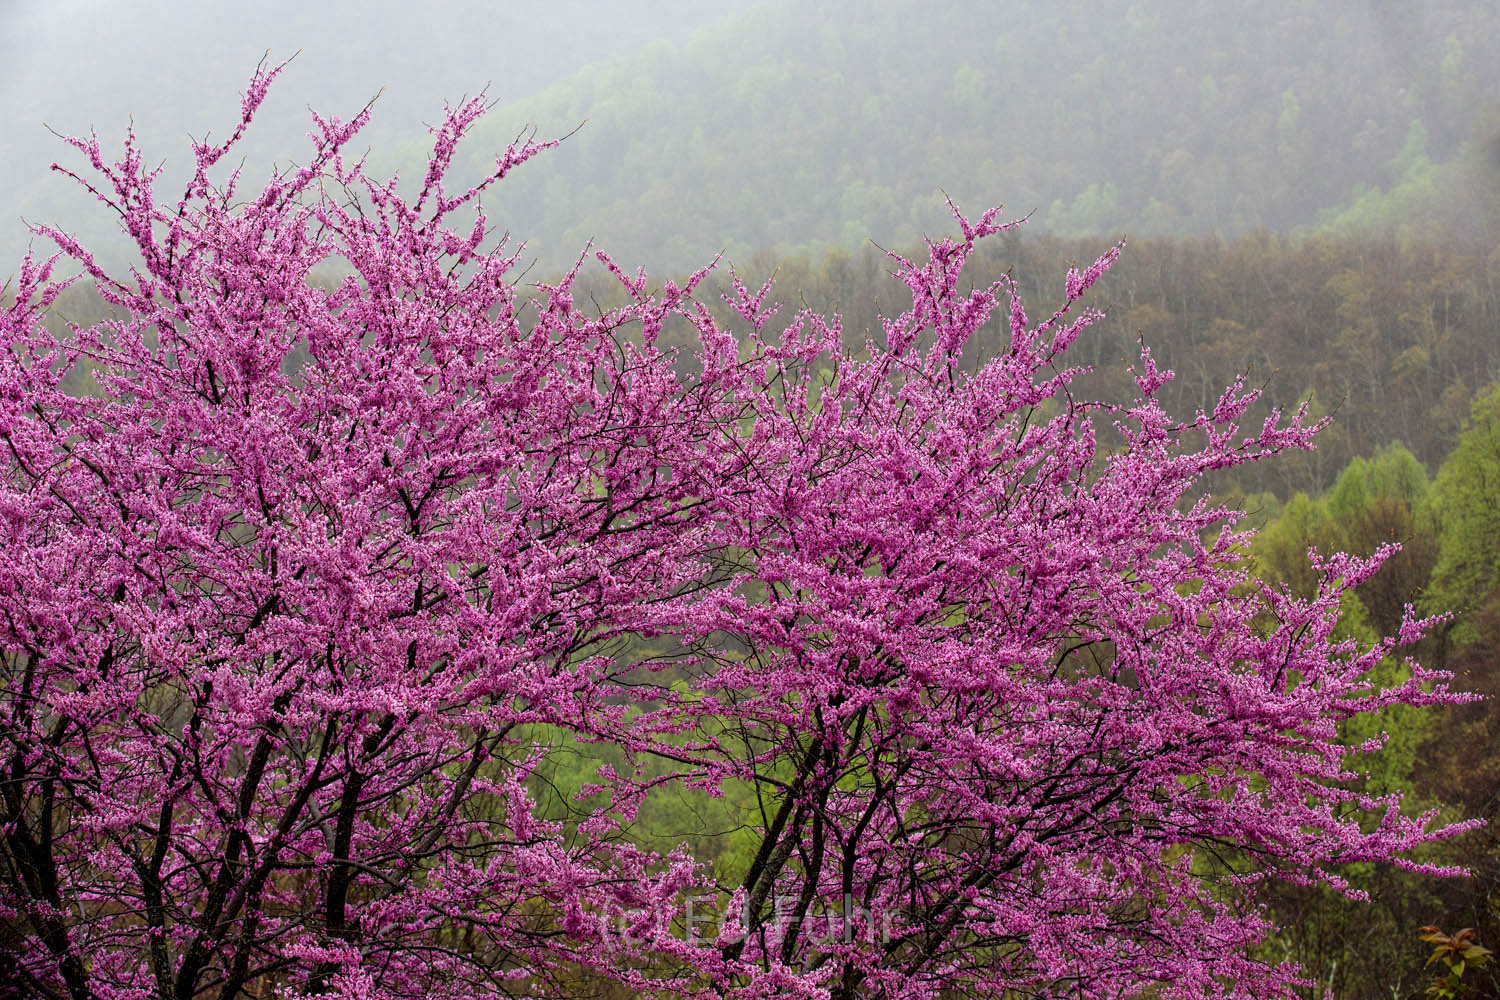 A large redbud near Bacon Hollow stands out in the fog.